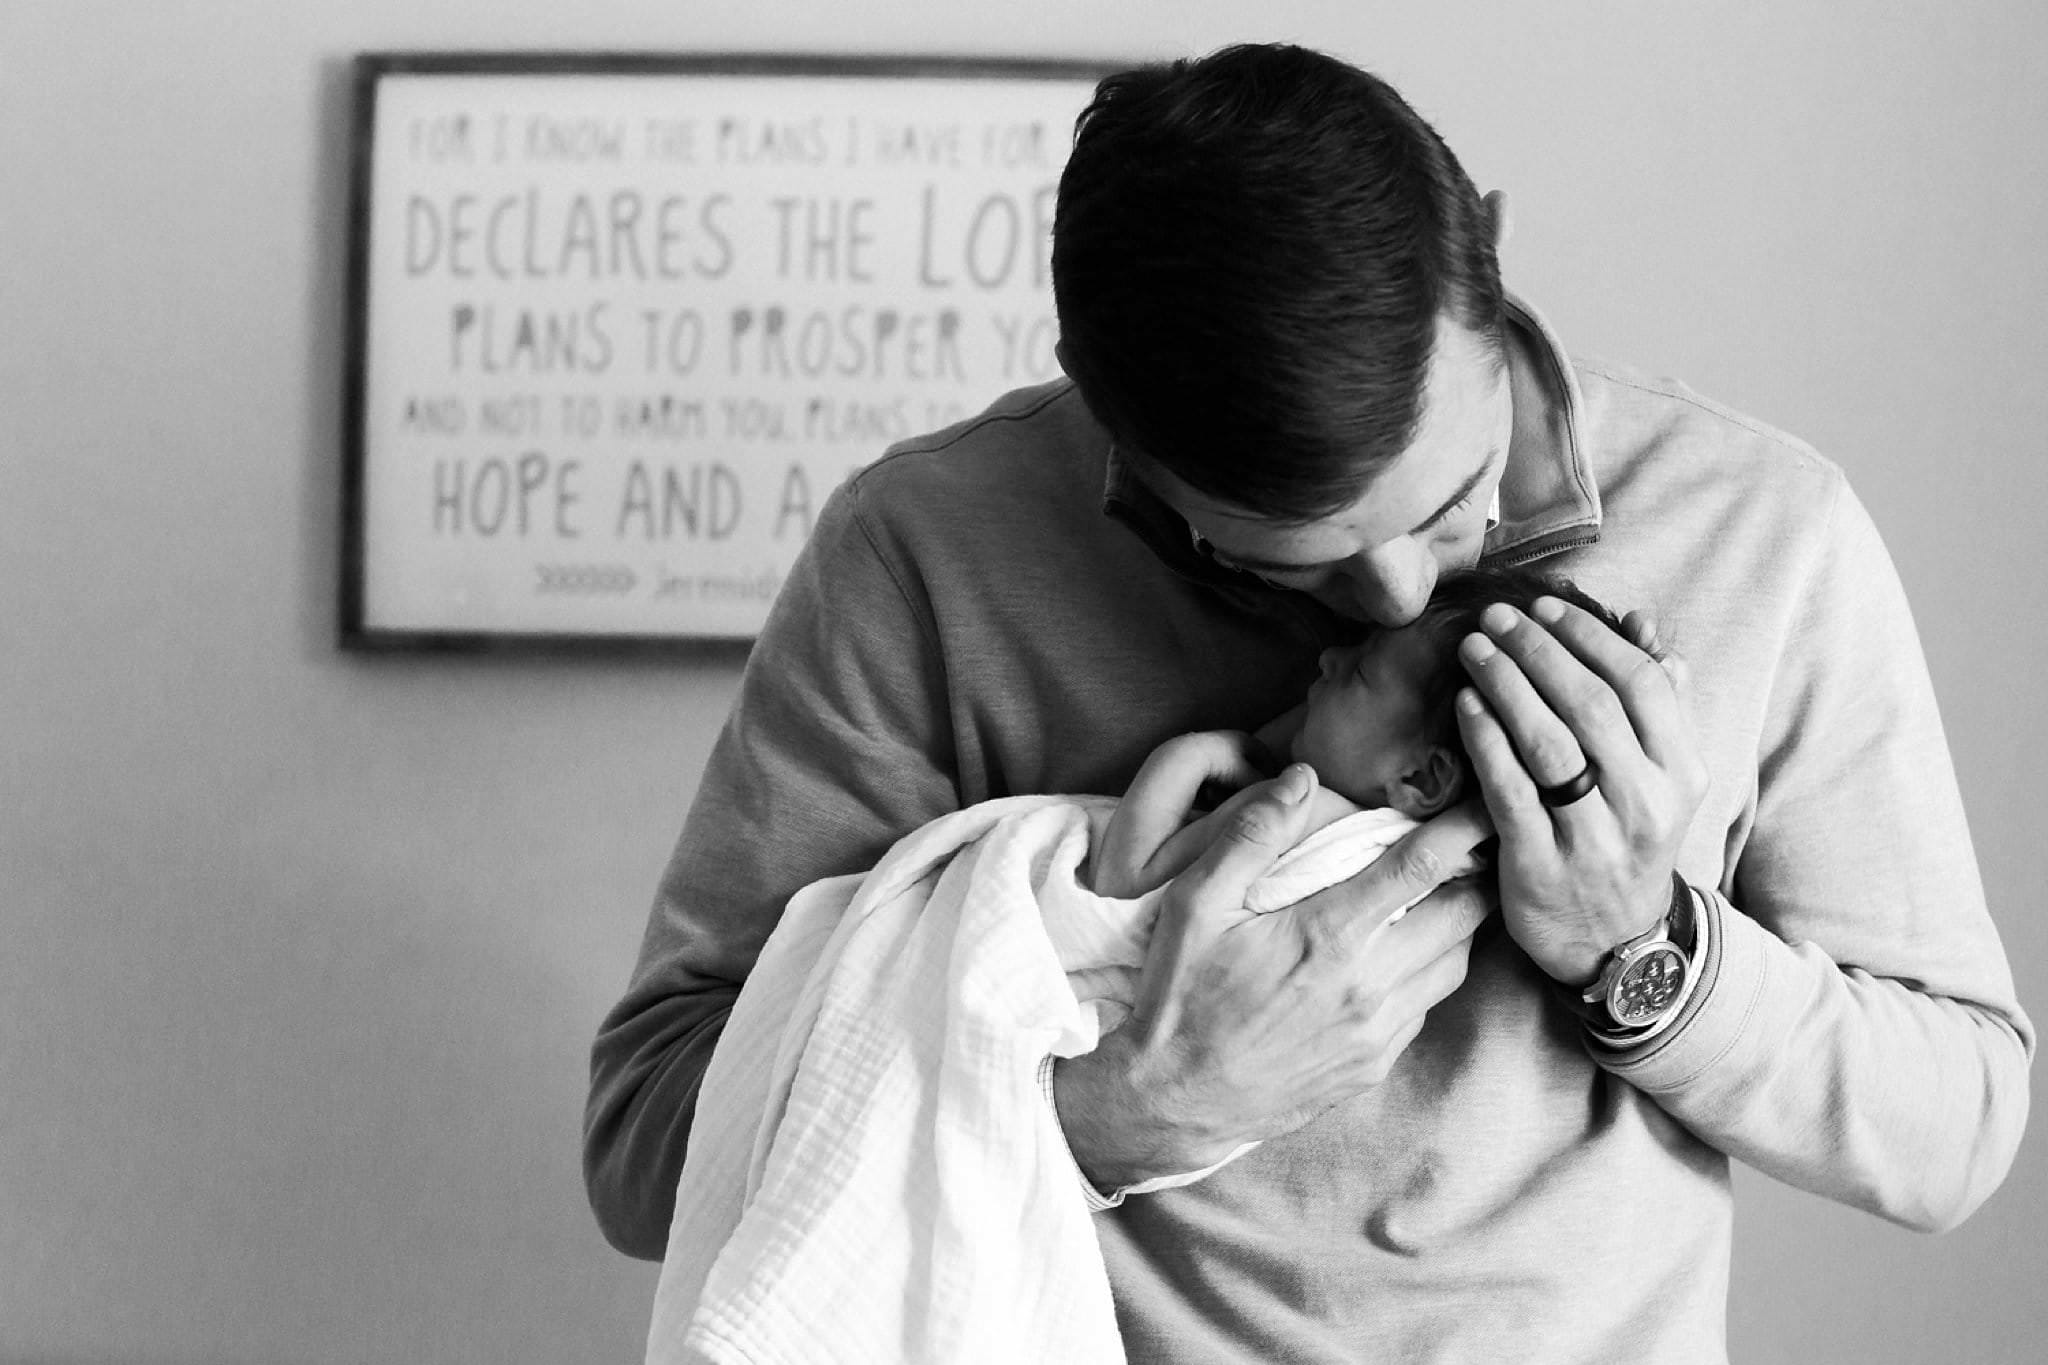 photos of father and newborn at home in pittsburgh pa